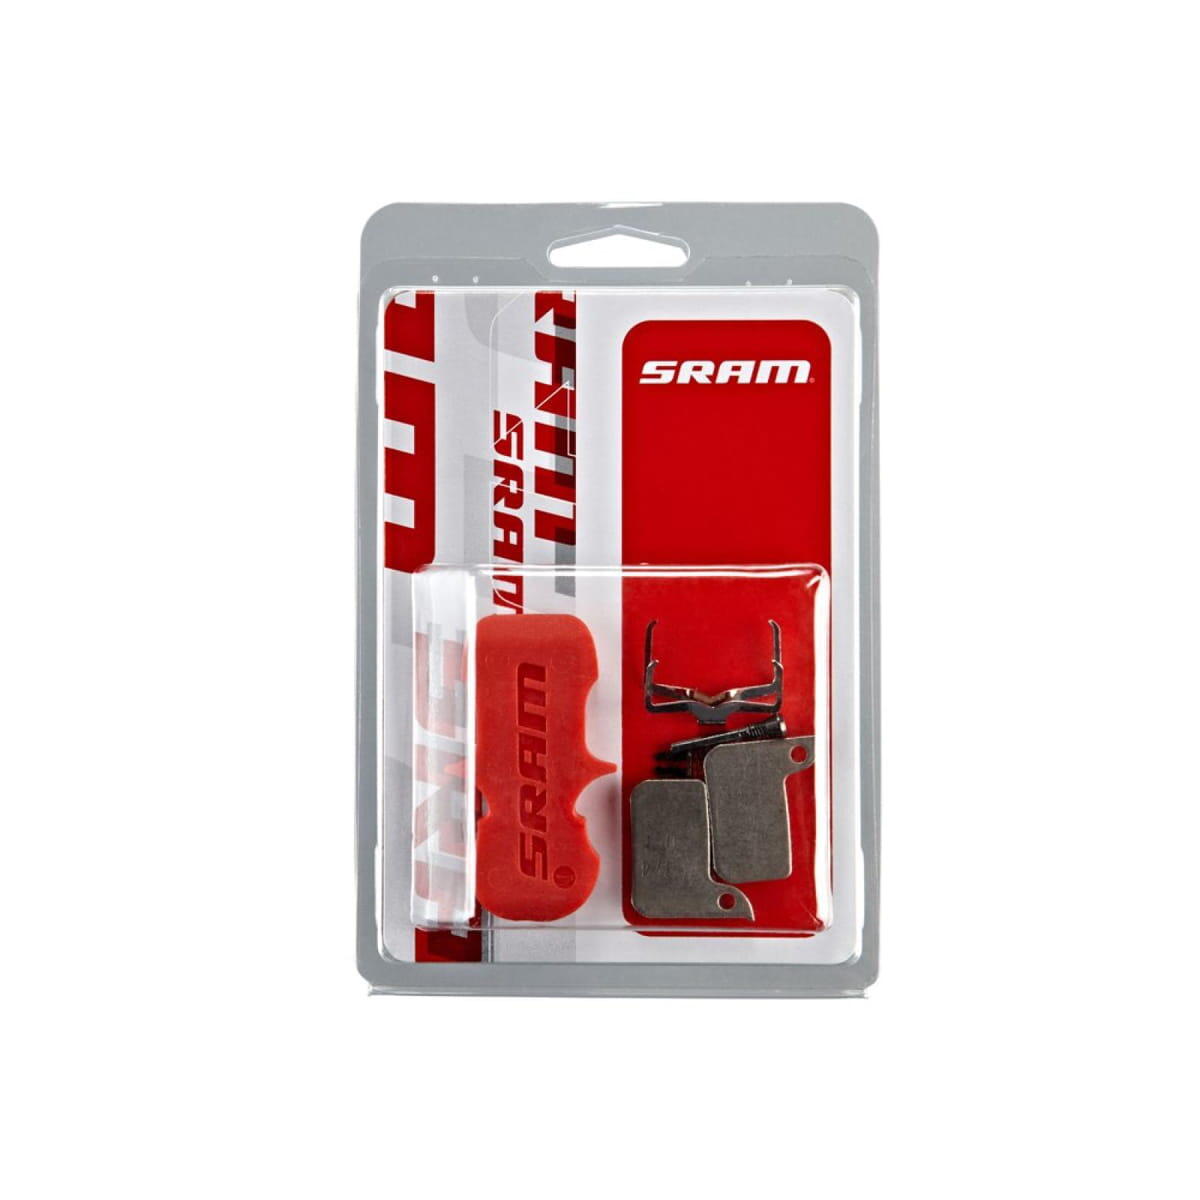 SRAM SRAM HRD Road Disc Brake Pads Sintered for Level/Force/Red AXS